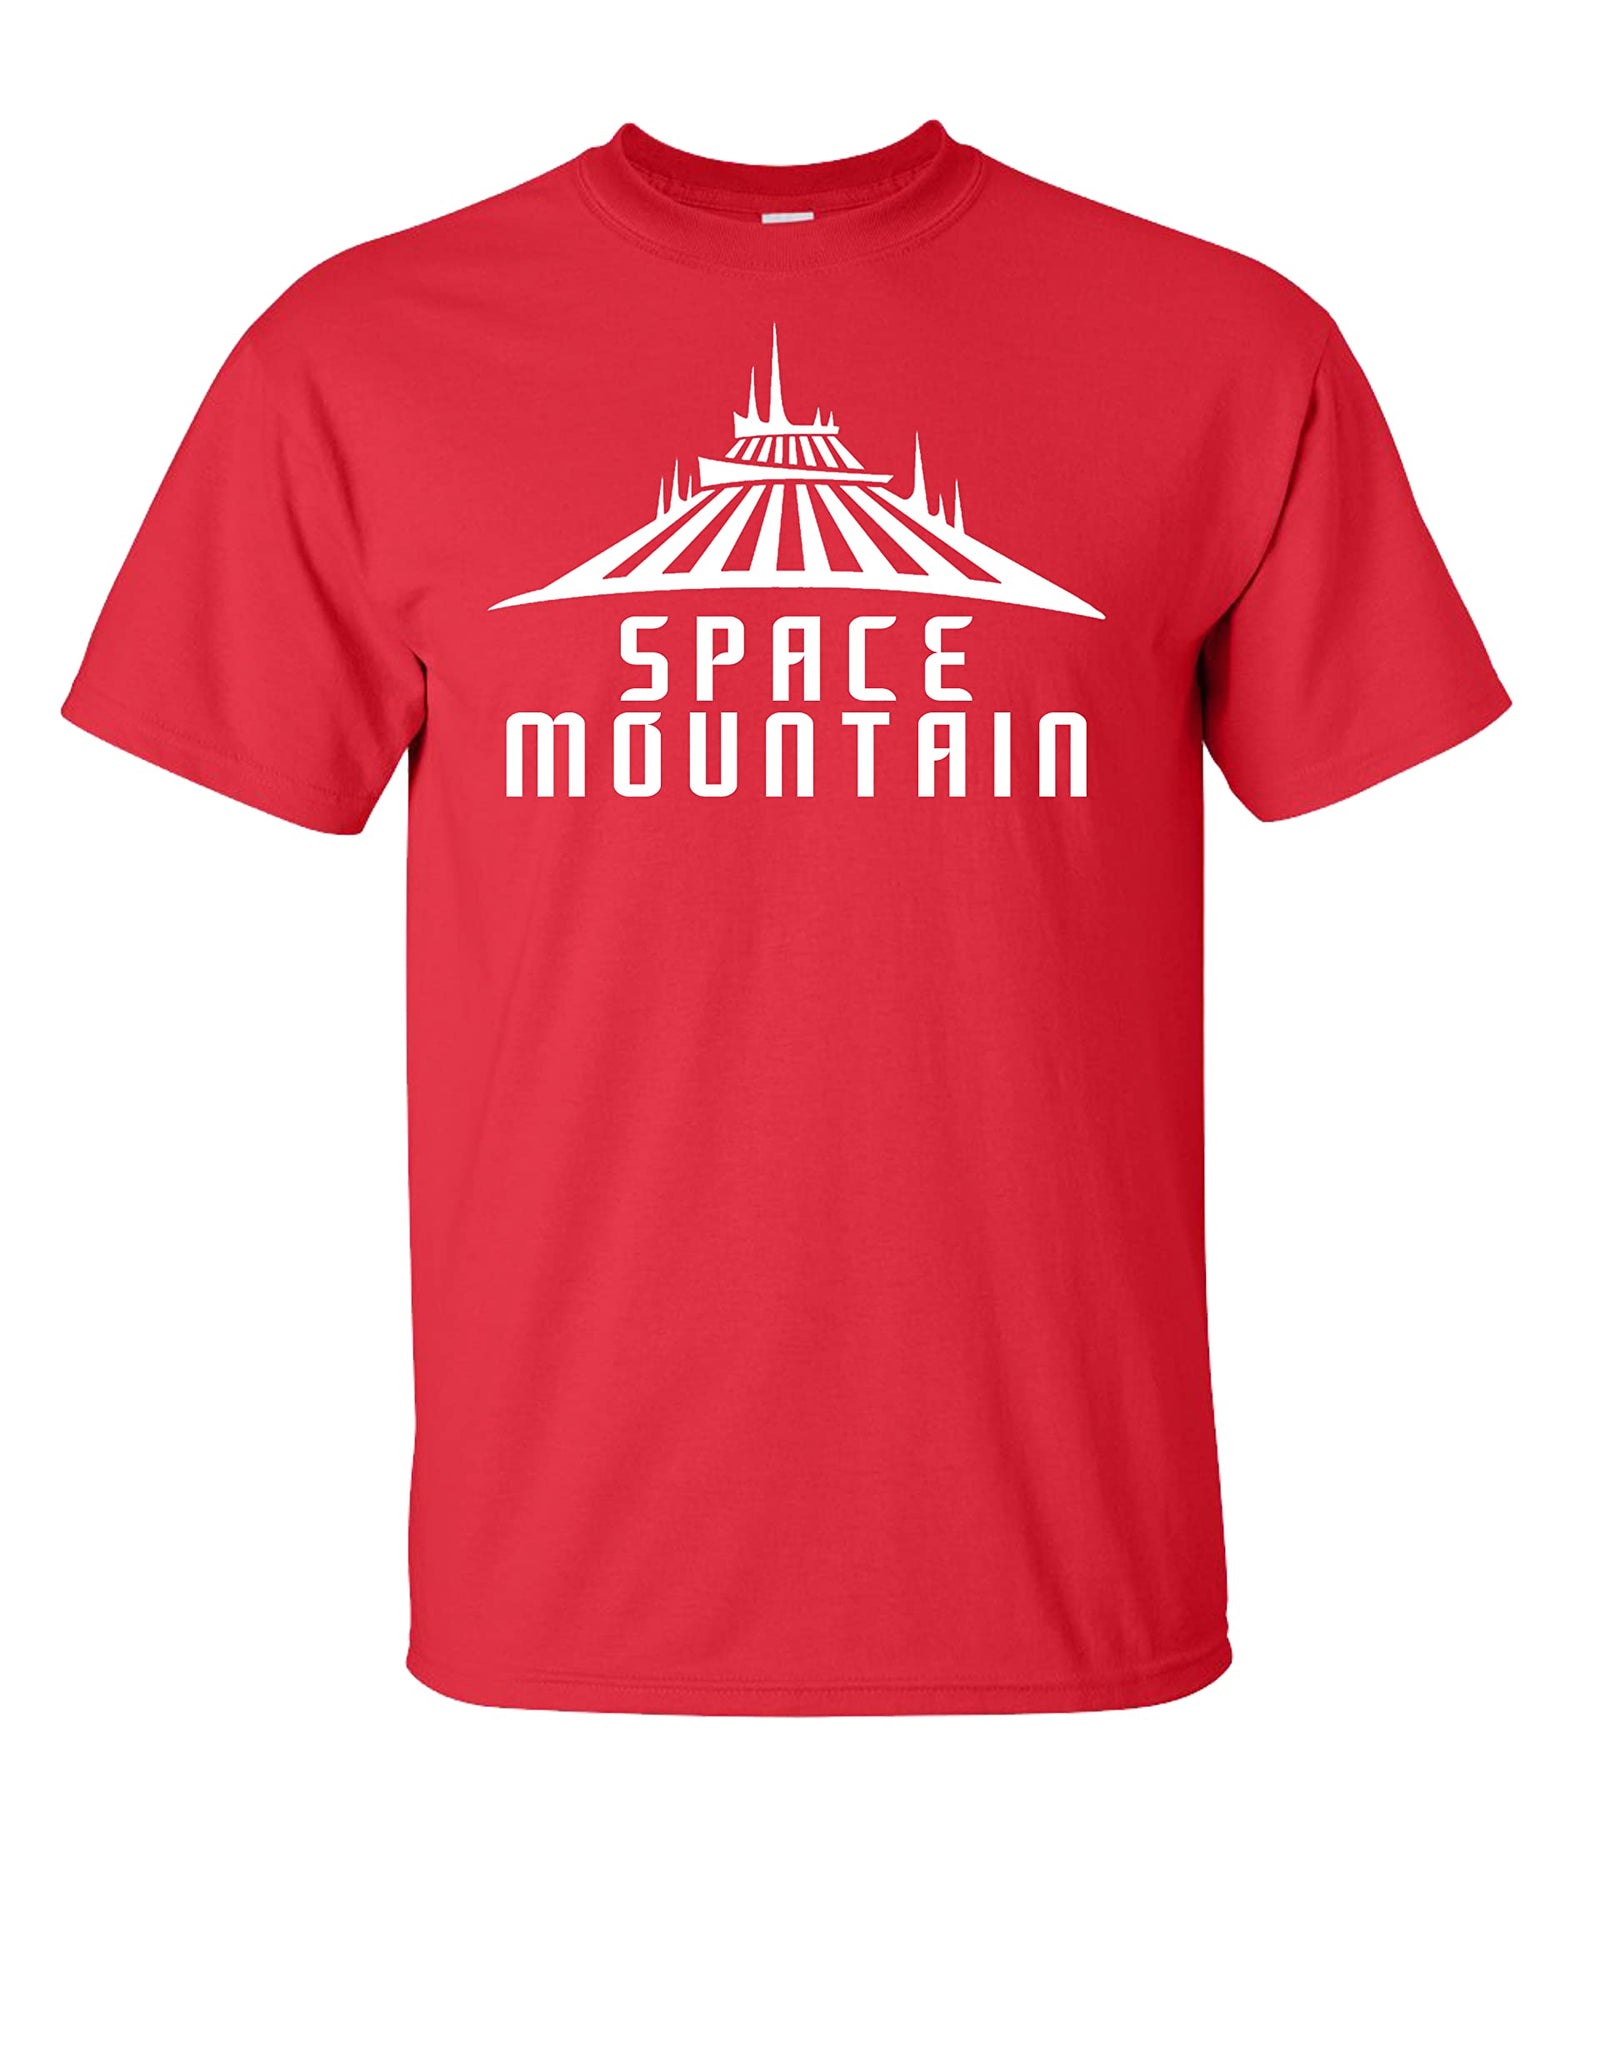 Space Mountain Classic Design Parks Inspired T-Shirt (Youth Large, Red)